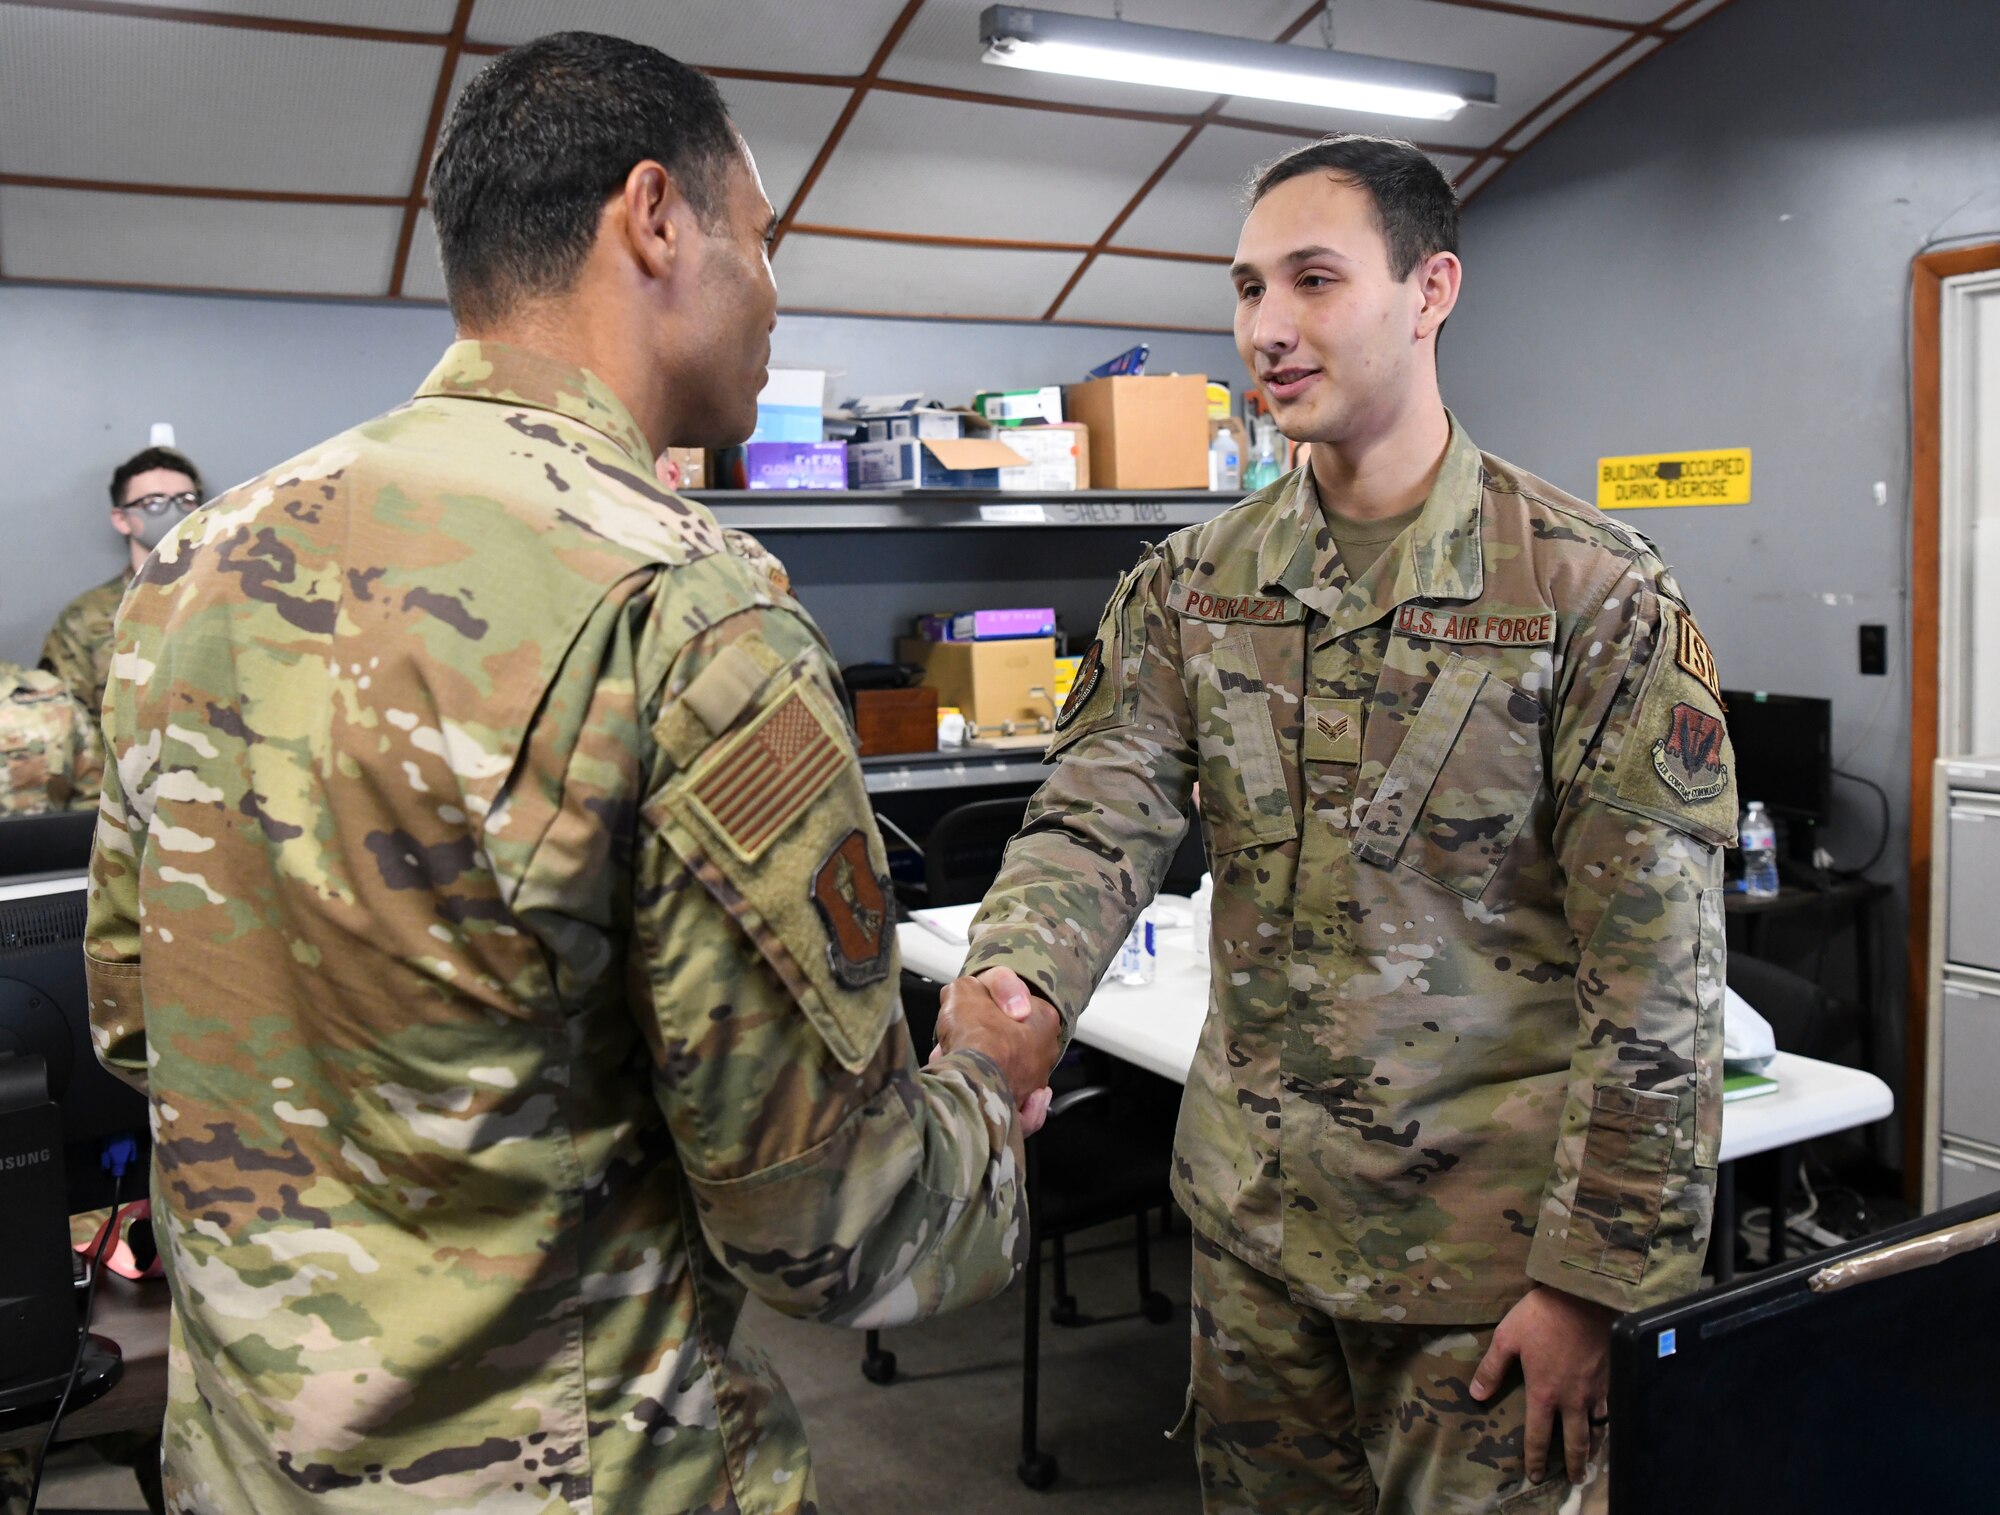 Col. Curry shakes hands with an airman from the 4th Reconnaissance Squadron.